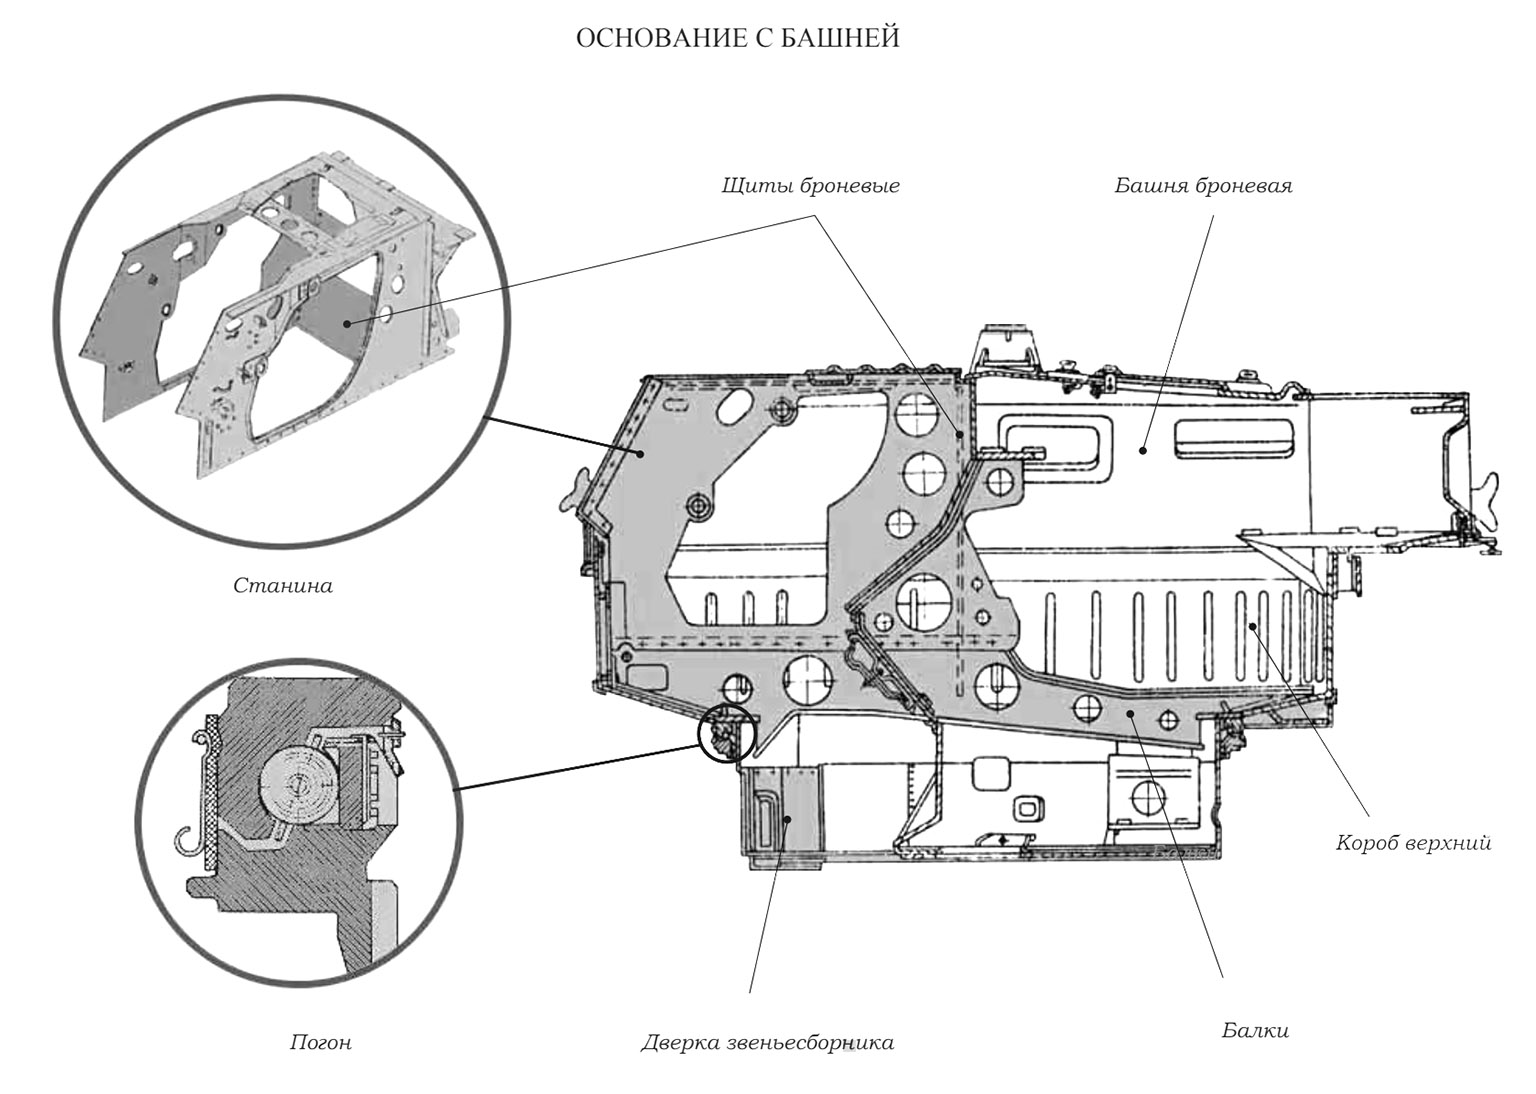 //www.military-references.com/wp-content/uploads/2023/09/zsu-23-4-shilka-turret-drawing-01.jpg